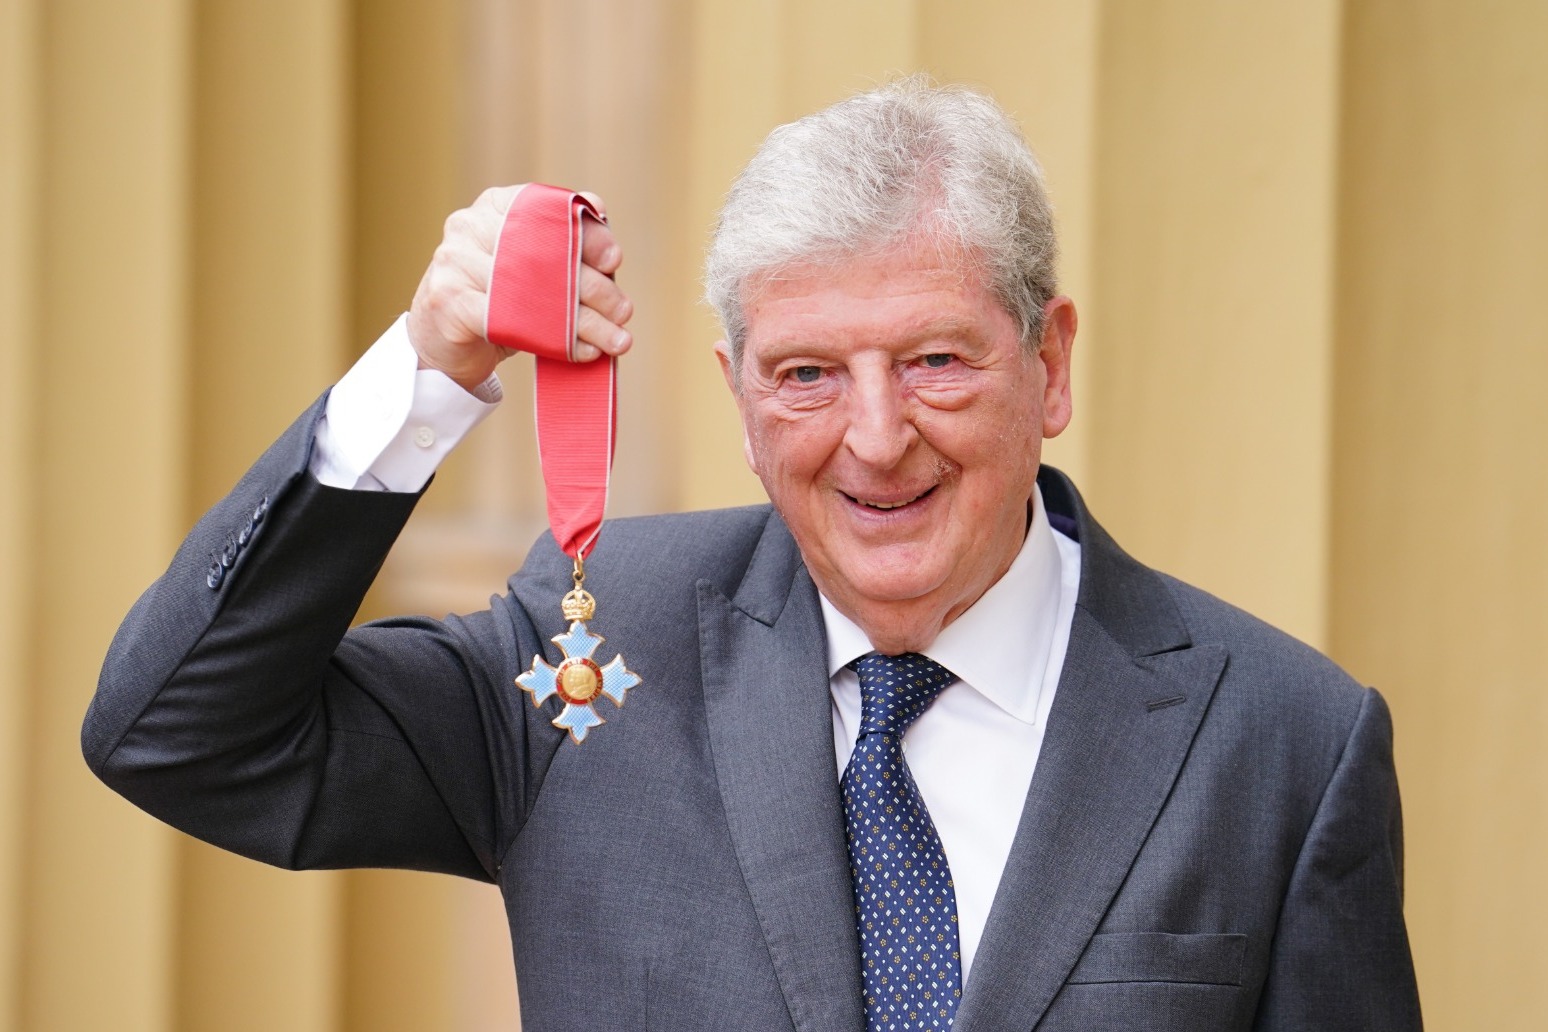 Roy Hodgson says CBE is ‘ultimate accolade’ 